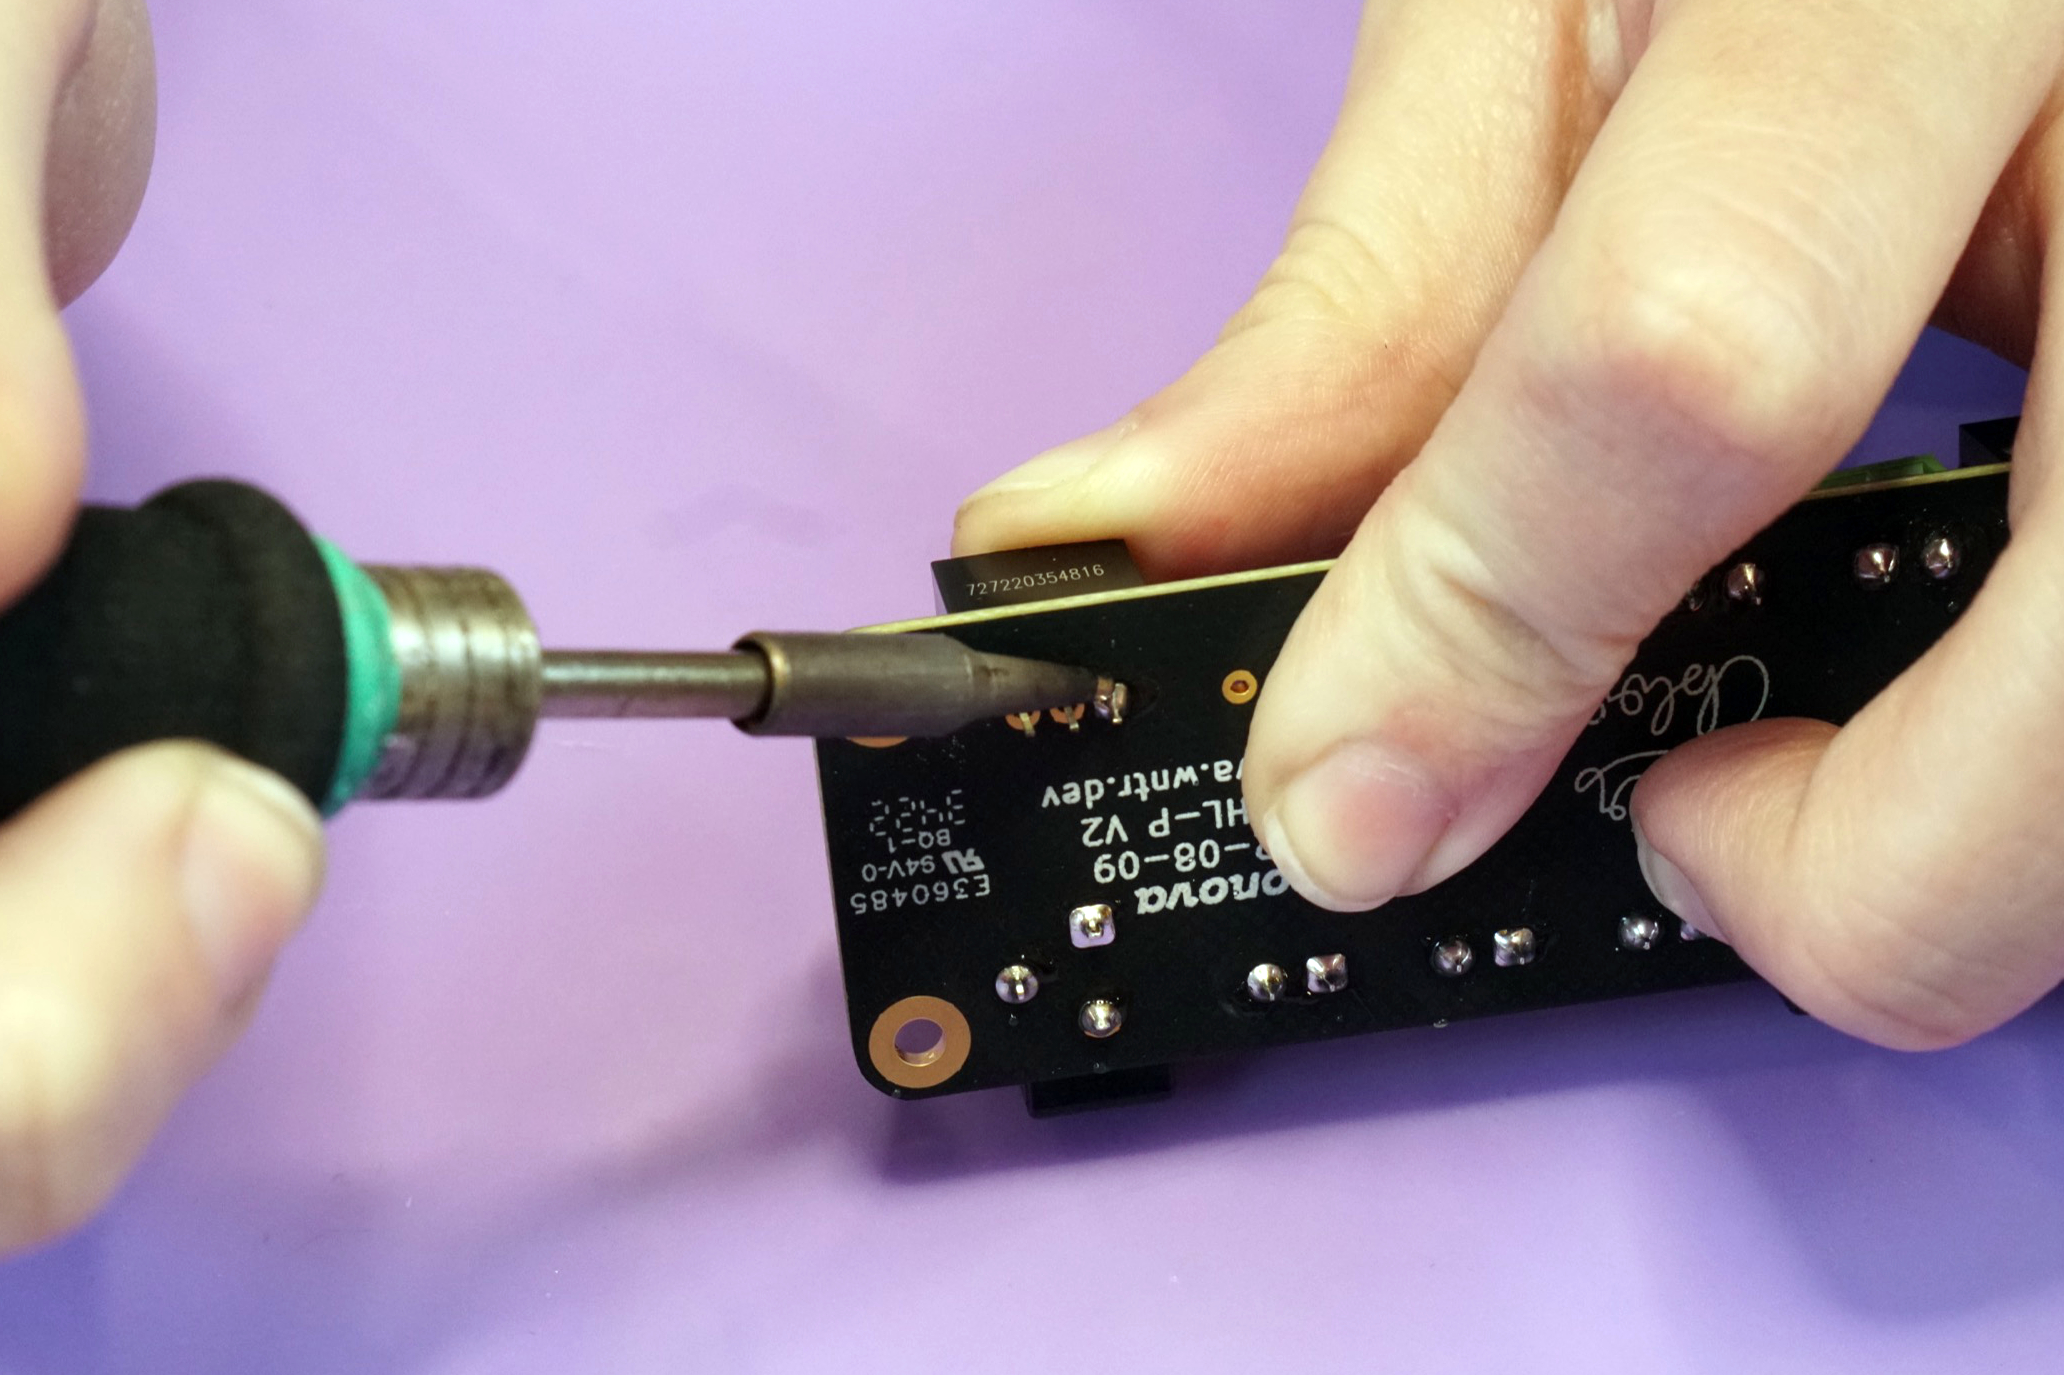 Photo of the 5V converter being pushed flush against the board while heat is applied to the solder joint using a soldering iron